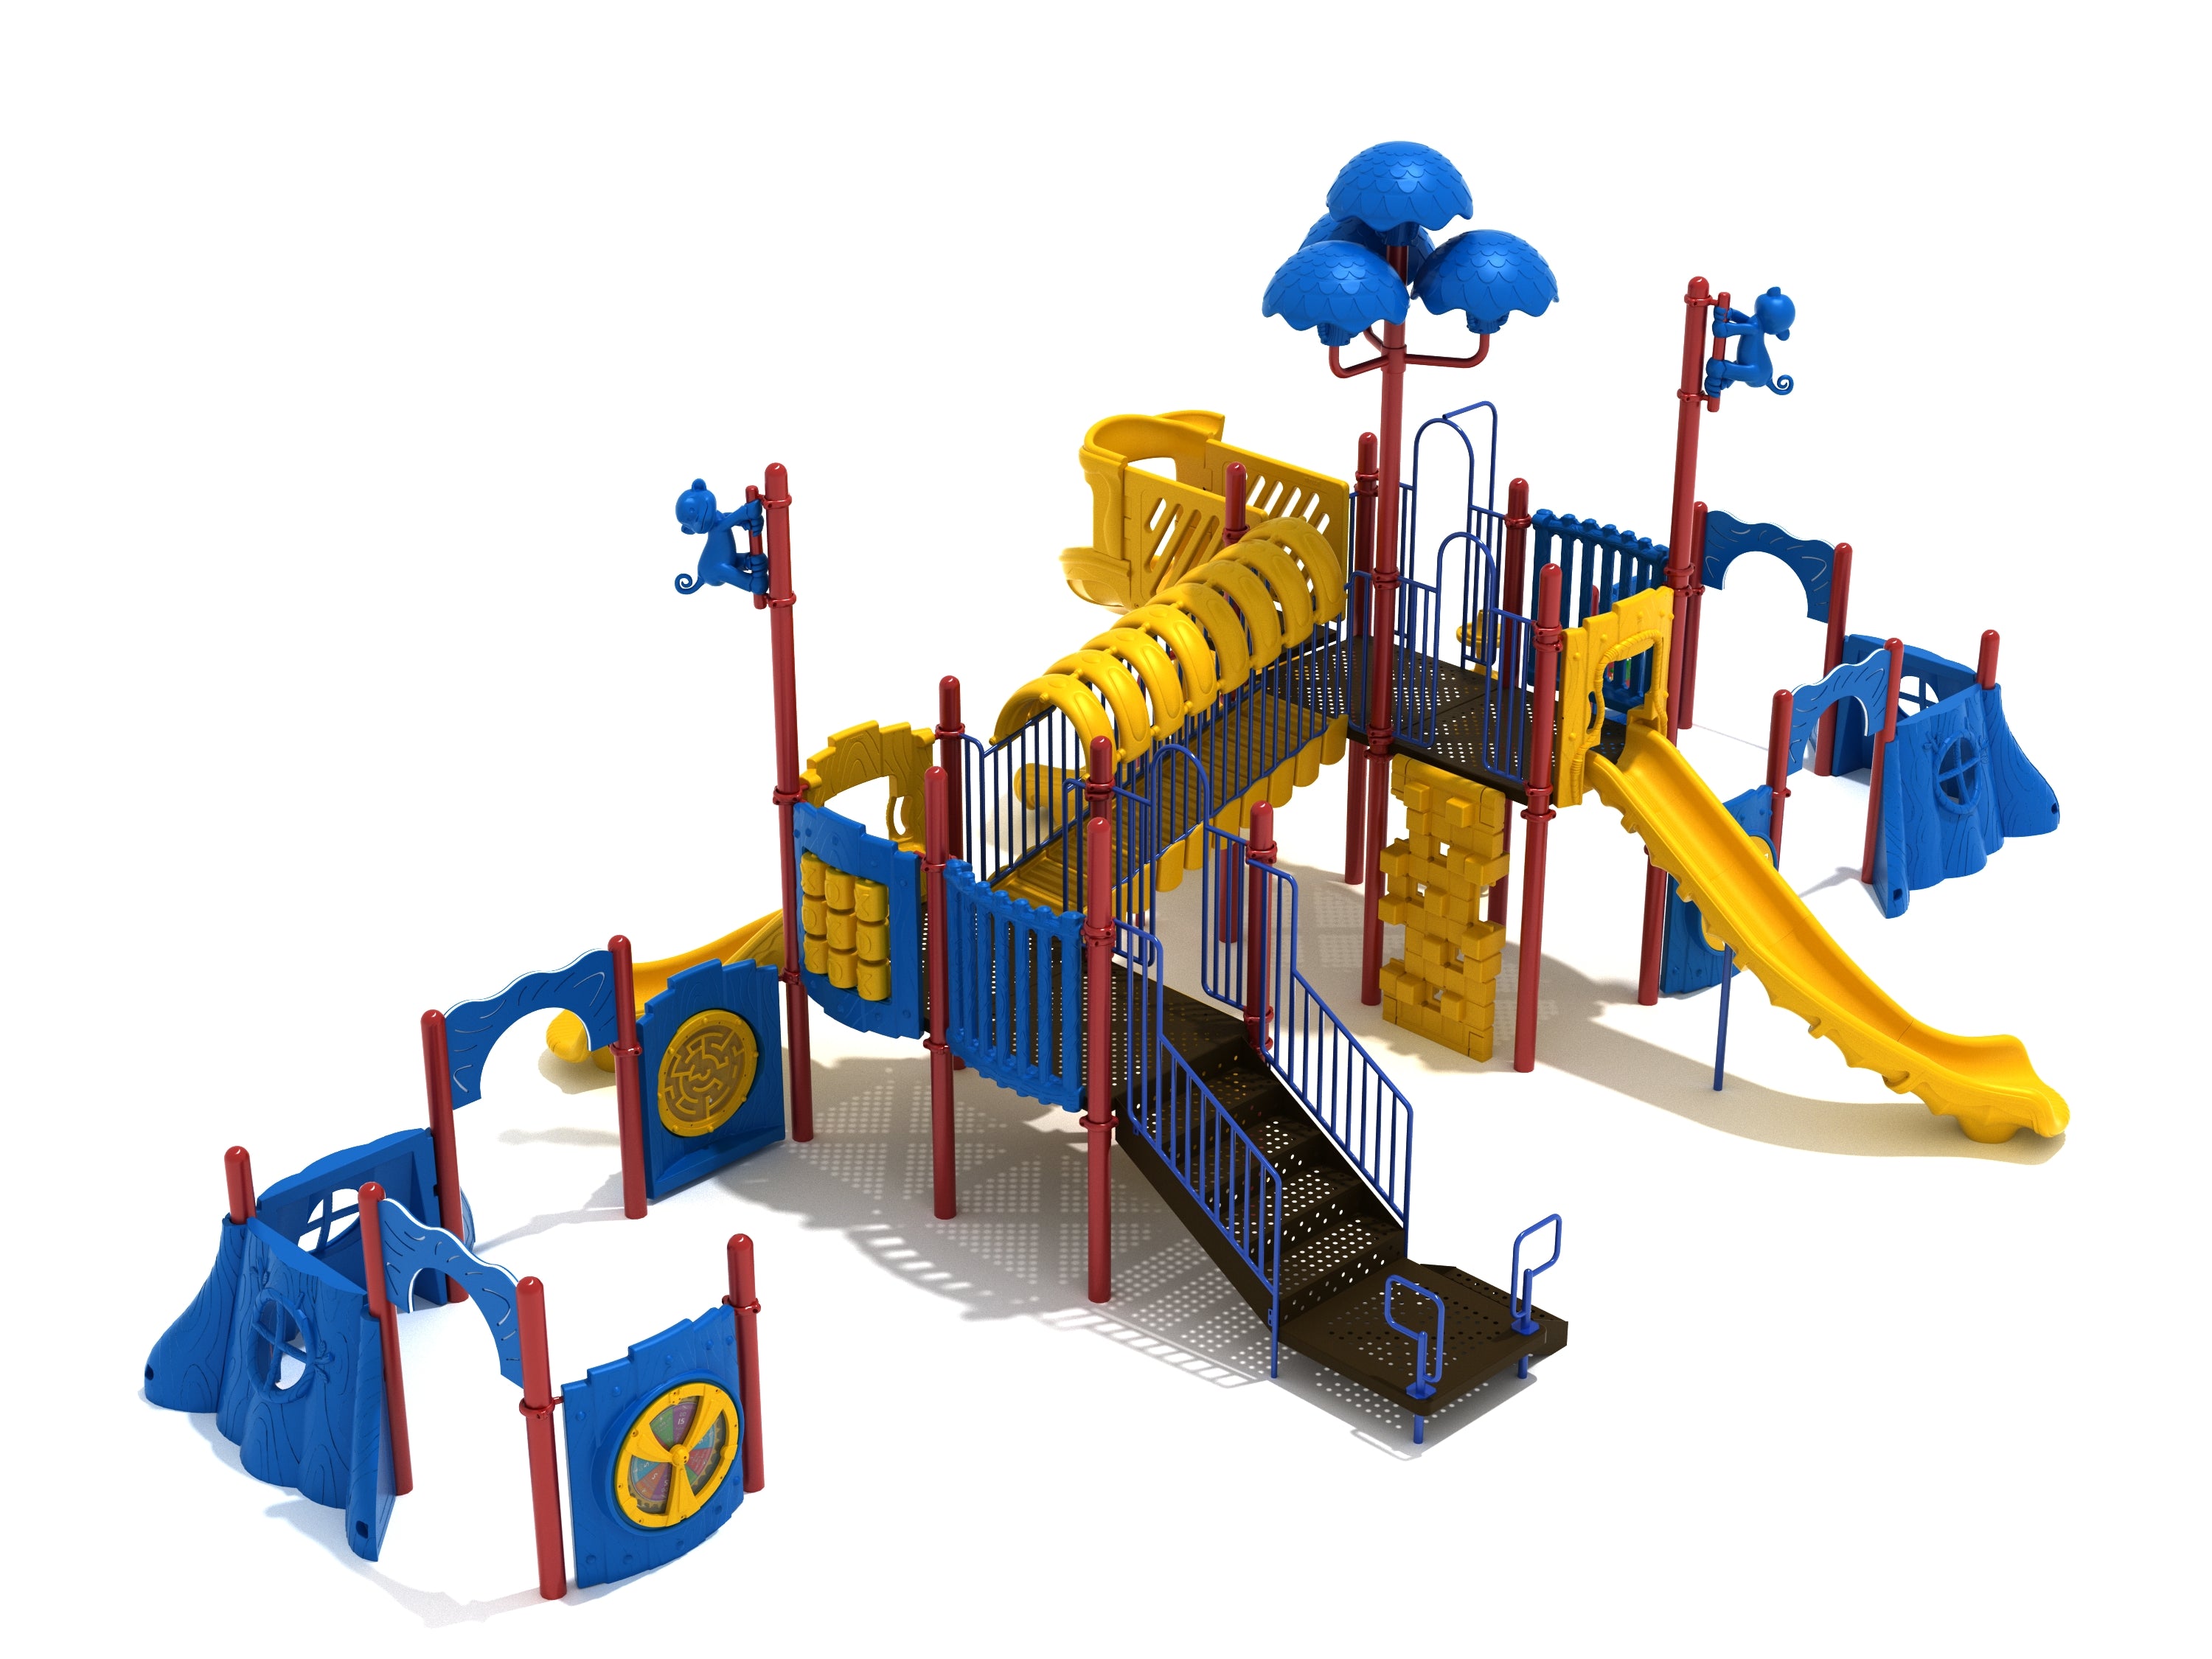 Lounging Leopard Playground Equipment Primary Colors